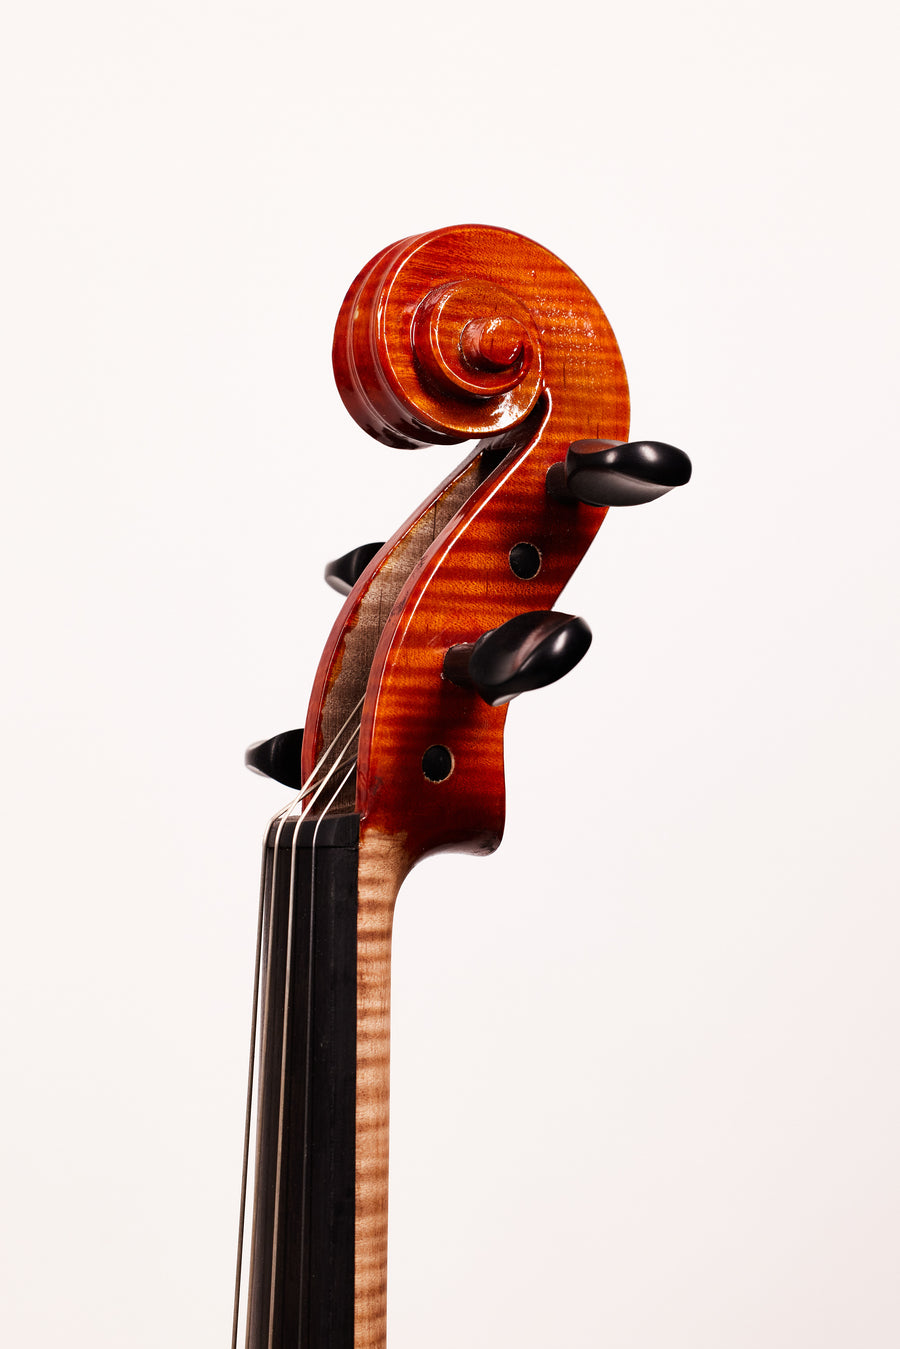 A Hungarian-American Viola By Janos Bodor, 2022. 15 1/2”